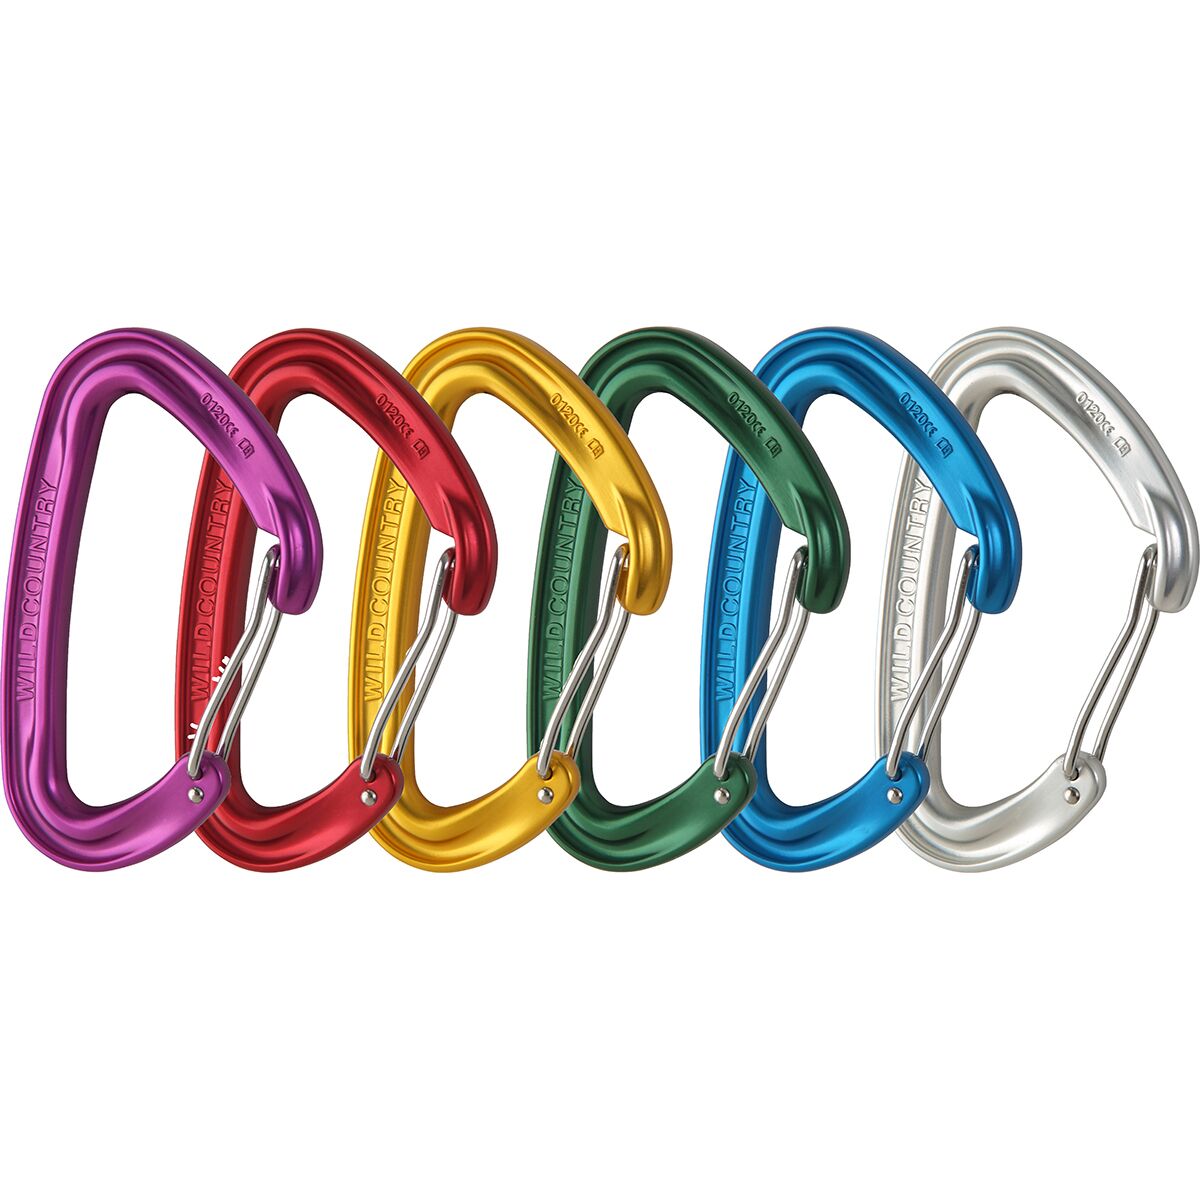 Wild Country Wildwire Rack - 6-Pack